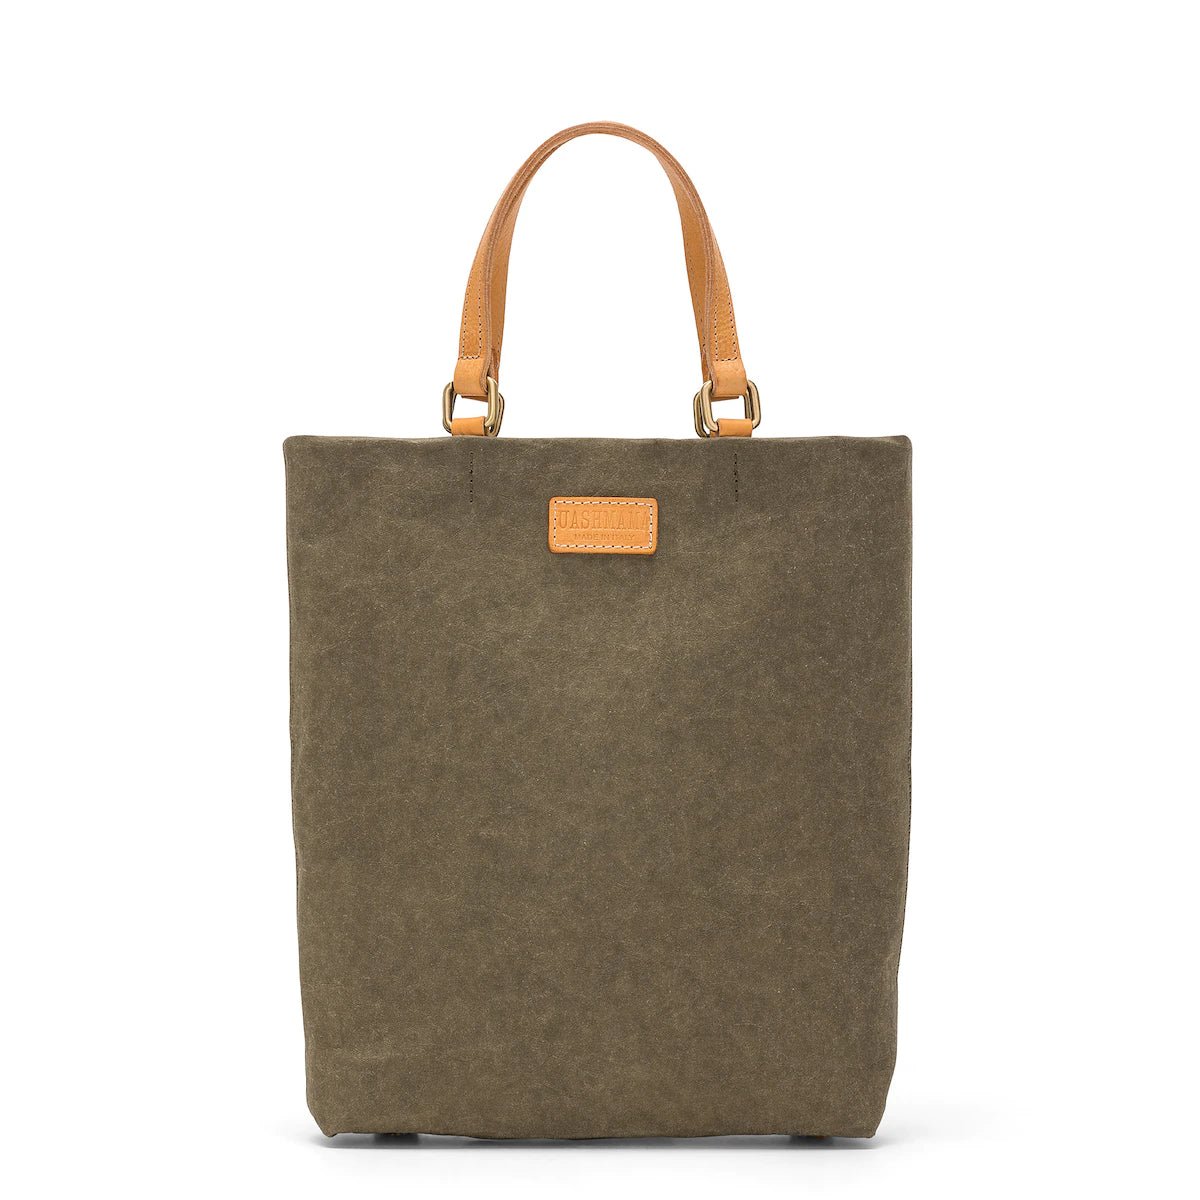 A rectangular washable paper tote bag is shown, with two top handles and a logo UASHMAMA stamp on the front. It is grey-brown in colour.